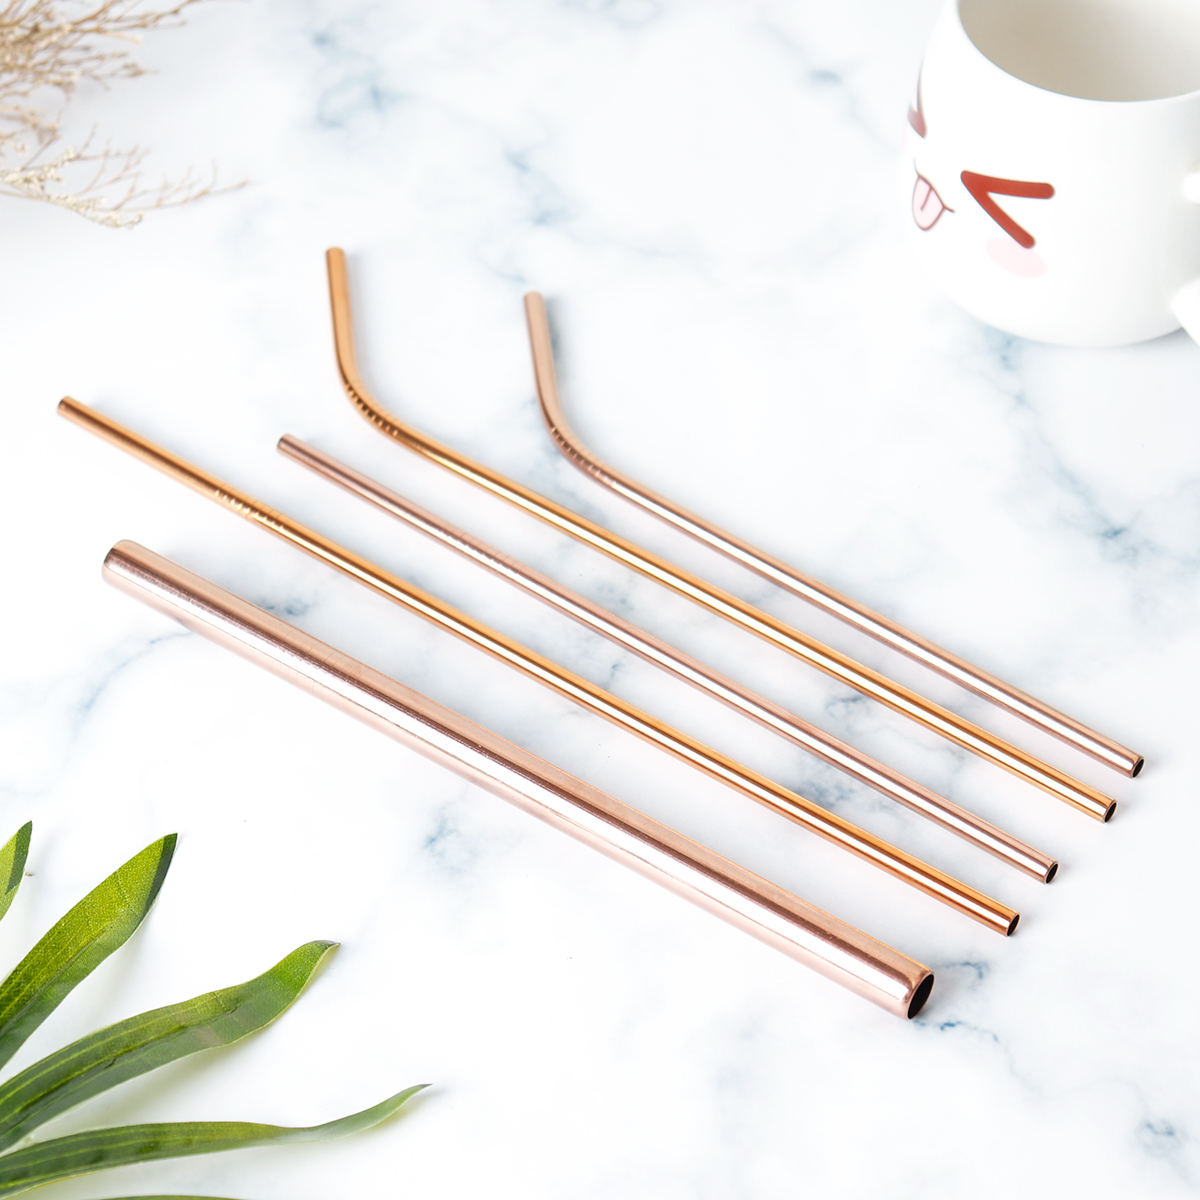 Portable-Metal-Straw-Set-304-Stainless-Steel-Straws-Reusable-Metal-Drinking-Straws-With-Cleaning-Bru-1532046-7